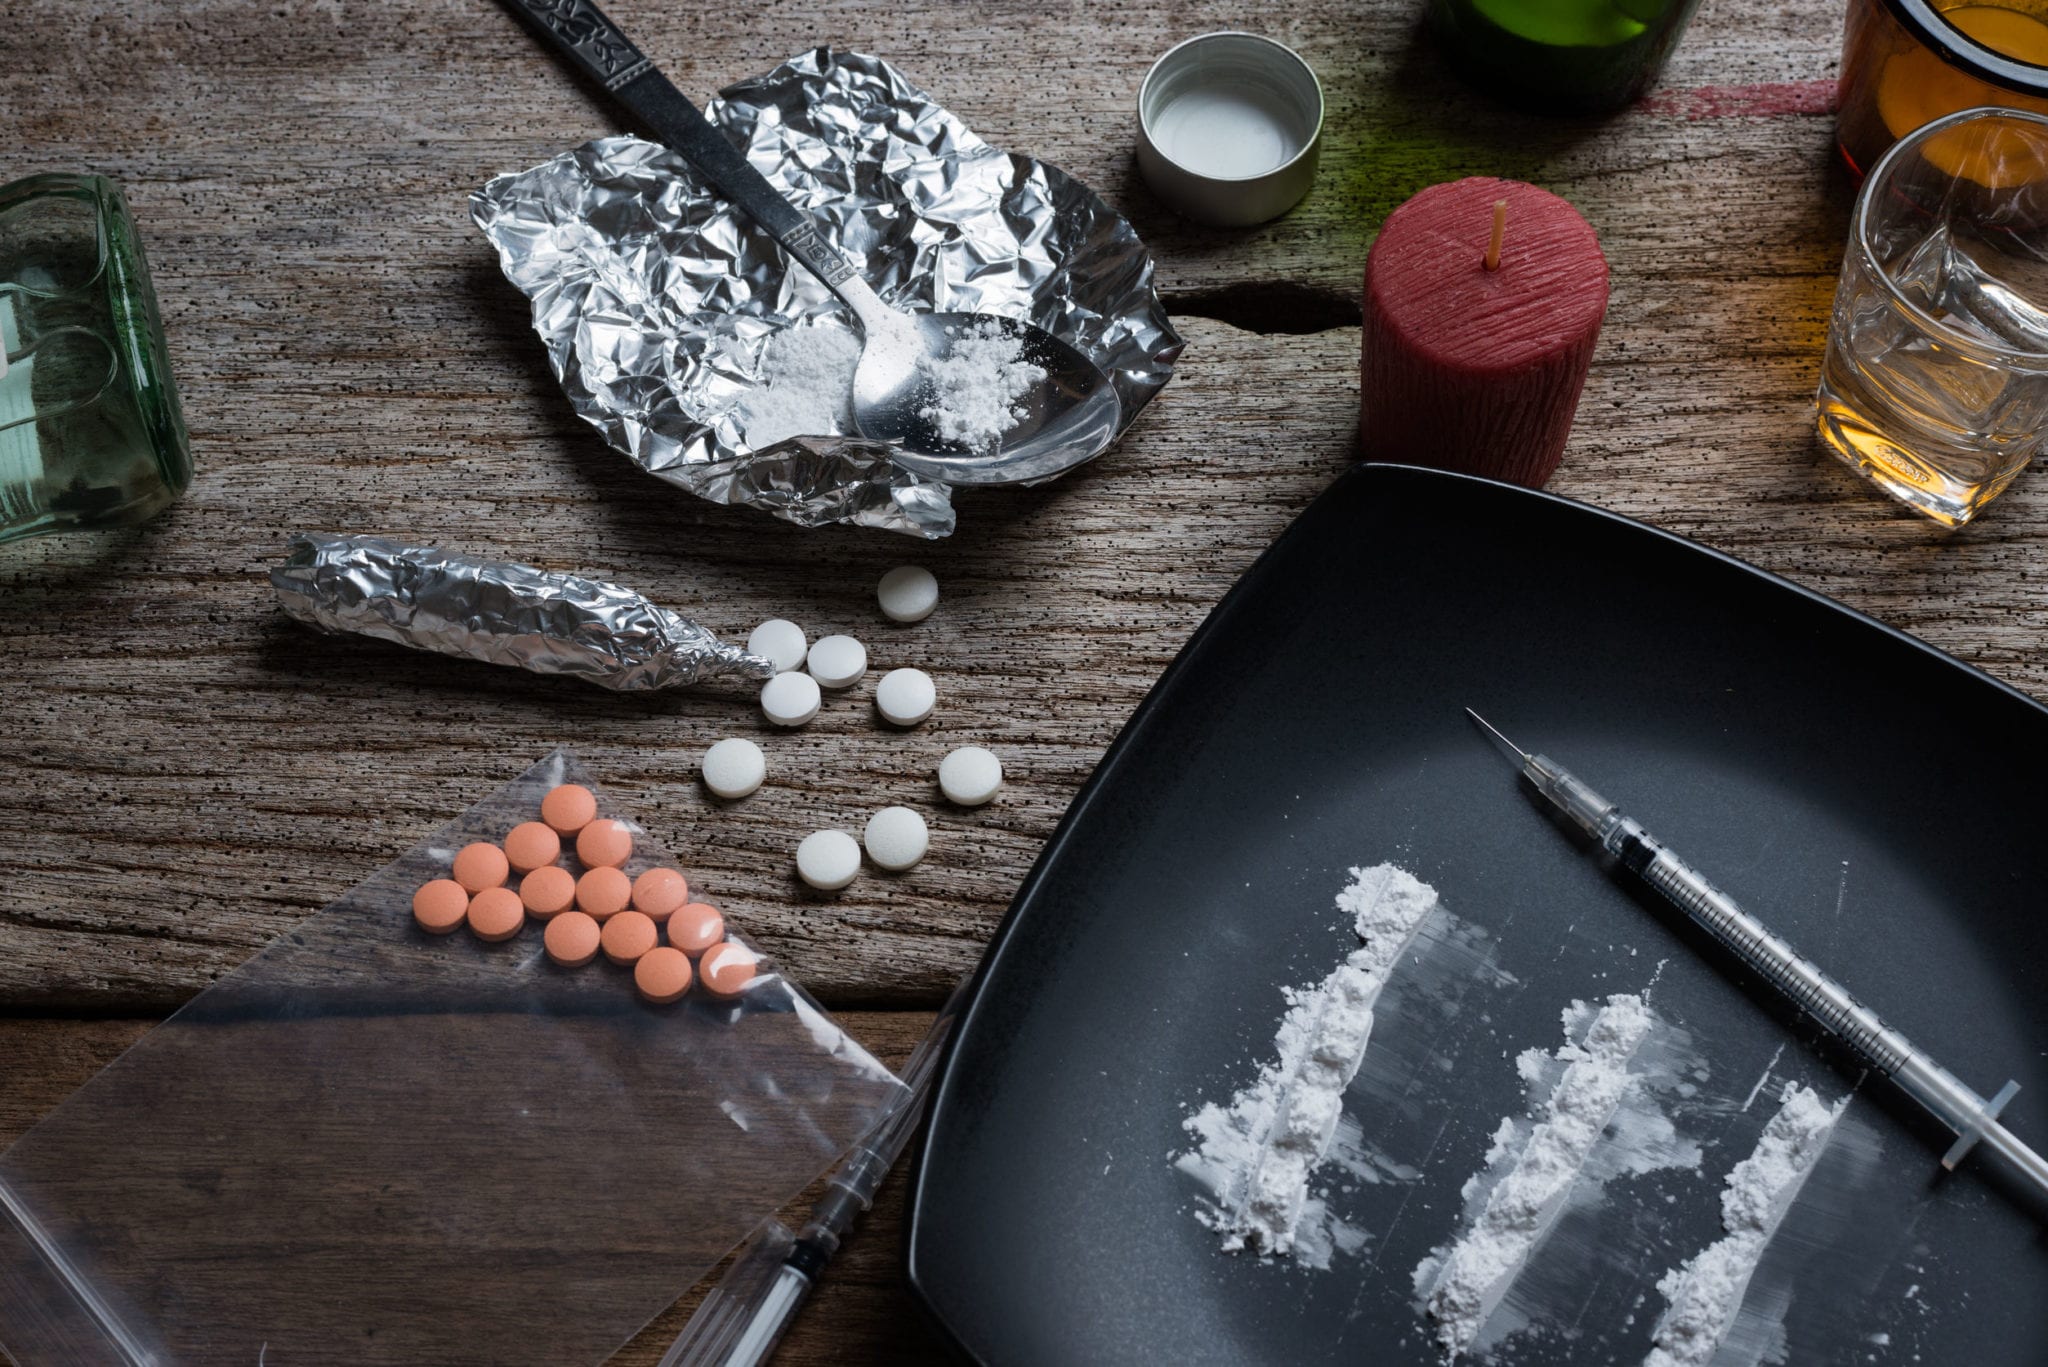 How the Type of Drug Impacts Your Charge in Minnesota